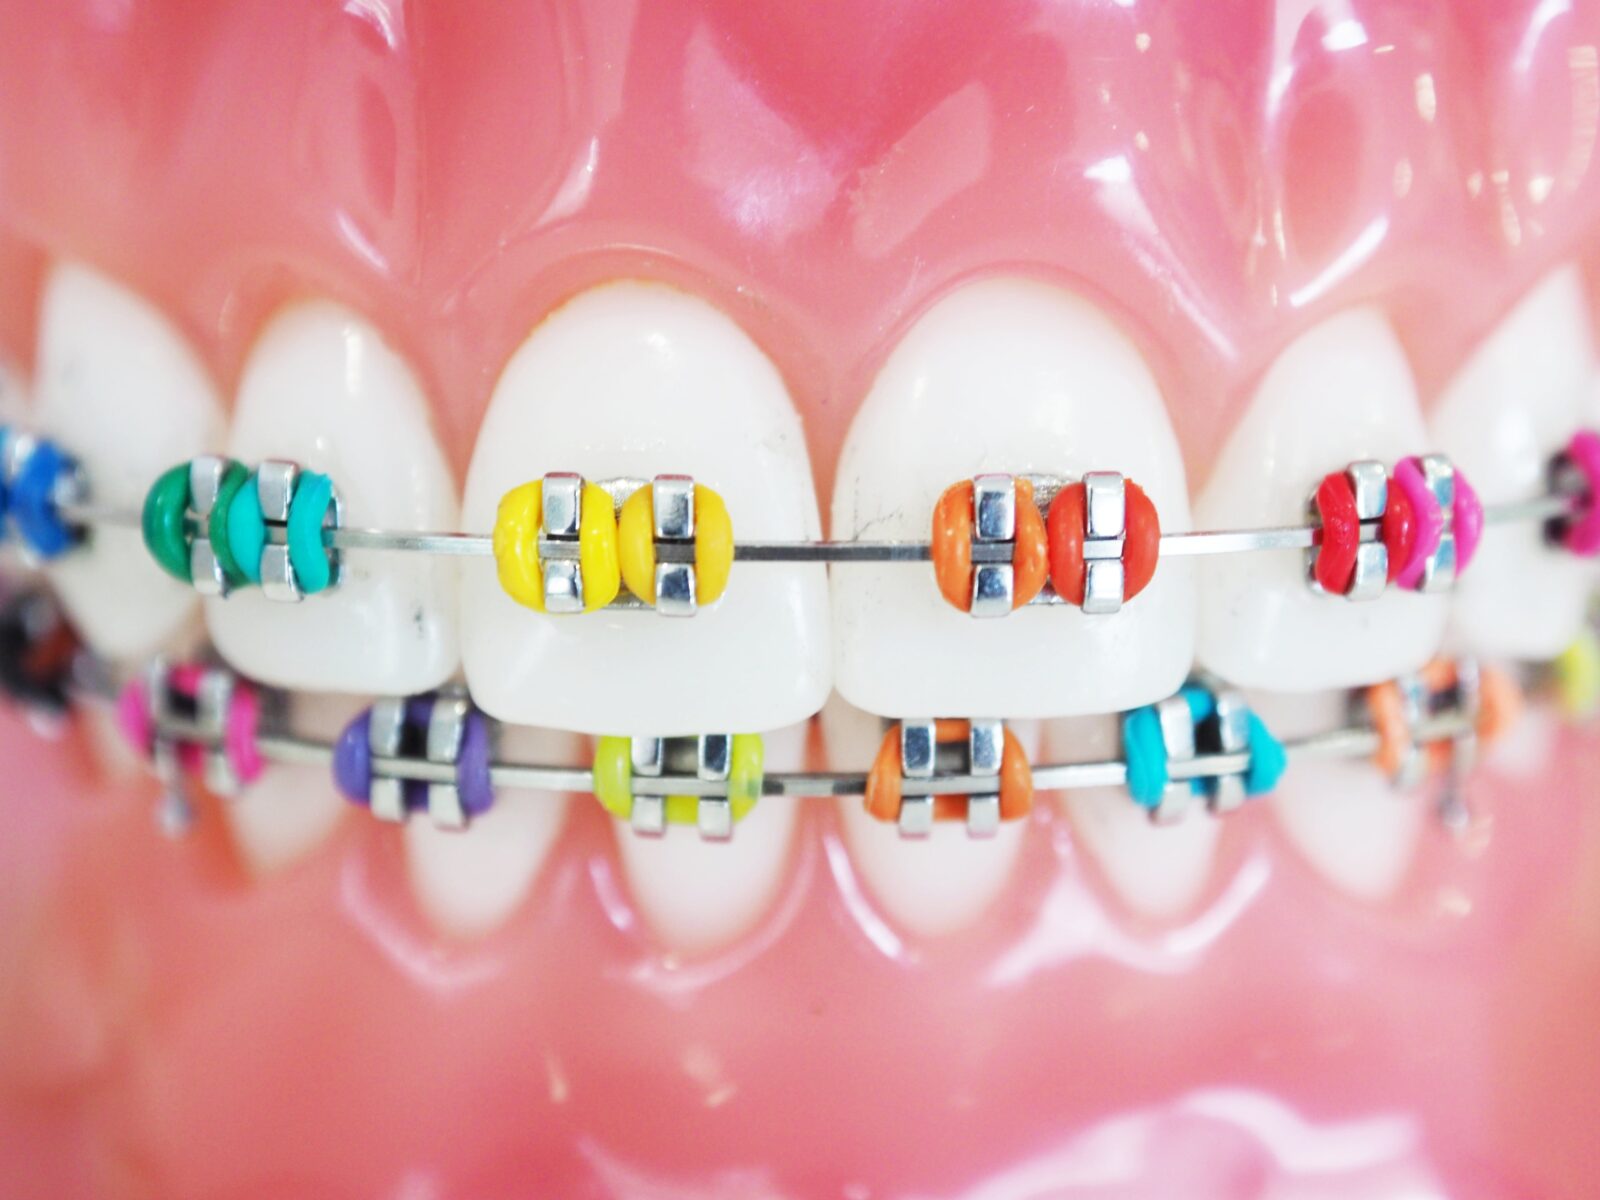 Close up orthodontic model and dentist tool - demonstration teeth model of multi color of orthodontic bracket or brace. colorful braces.